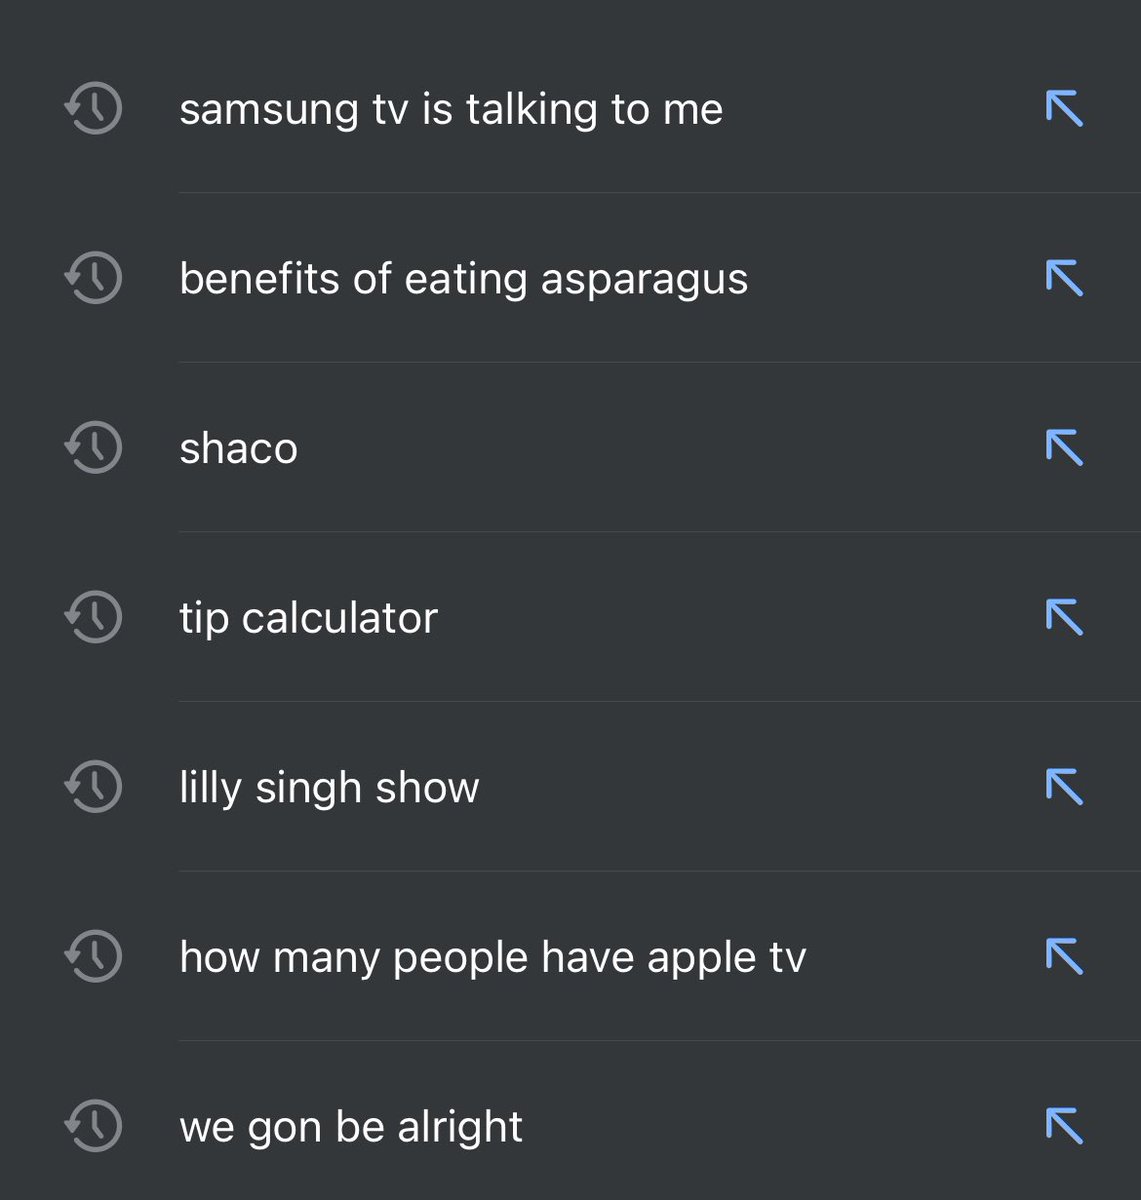 My recent search history y’all 💀💀💀